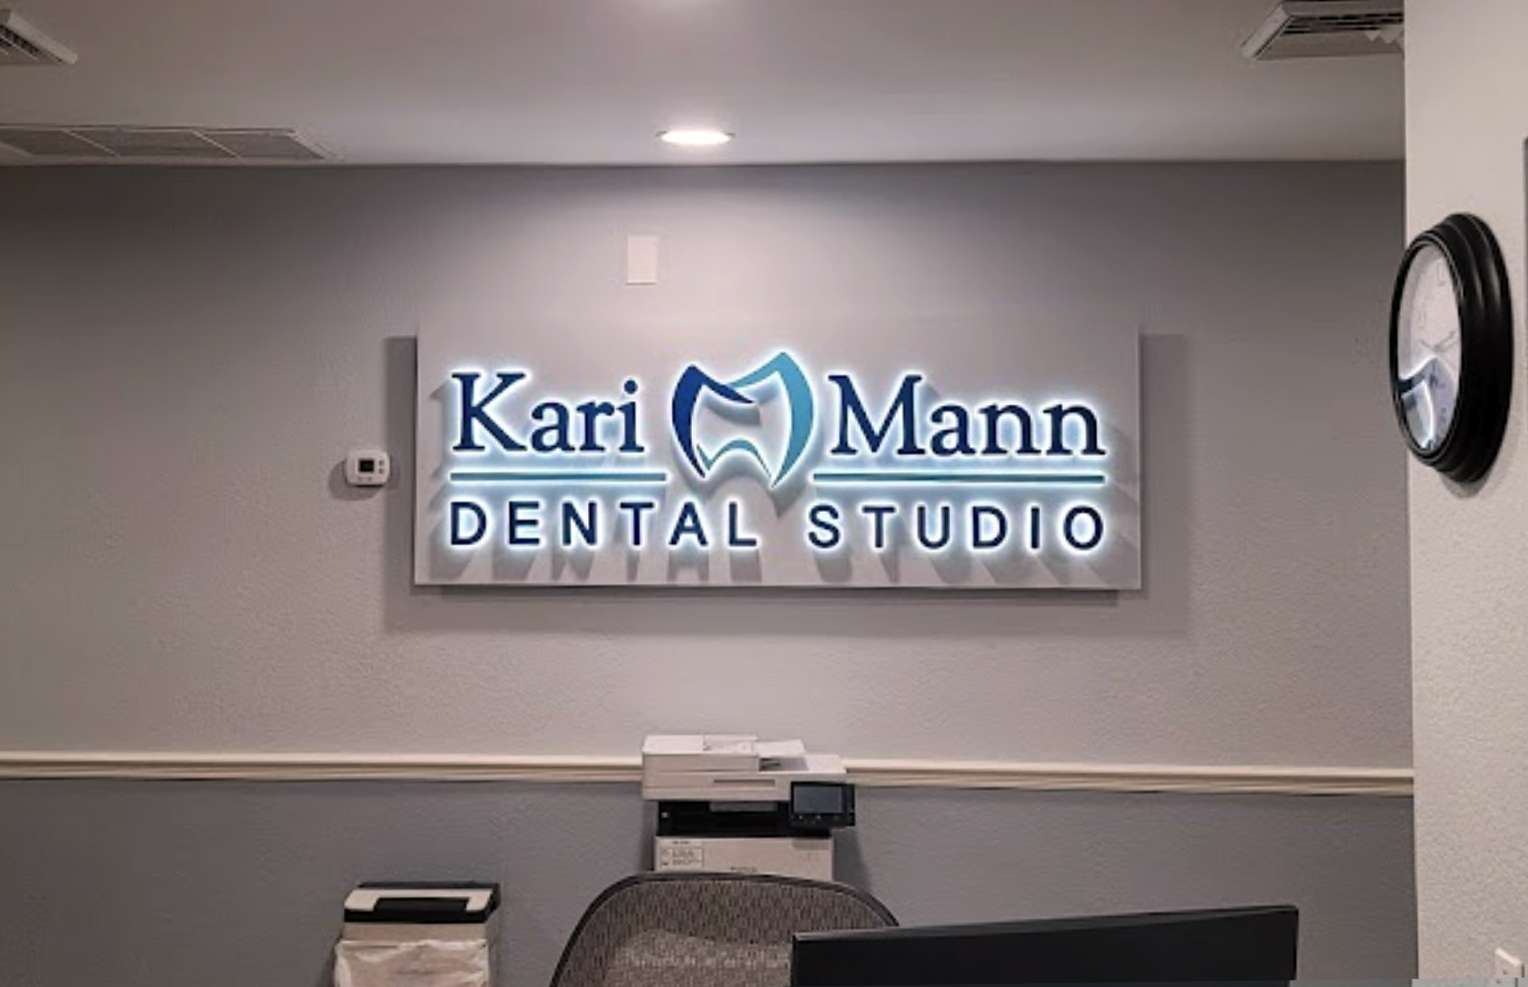 Indoor LED Sign with Halo-Lit Letters